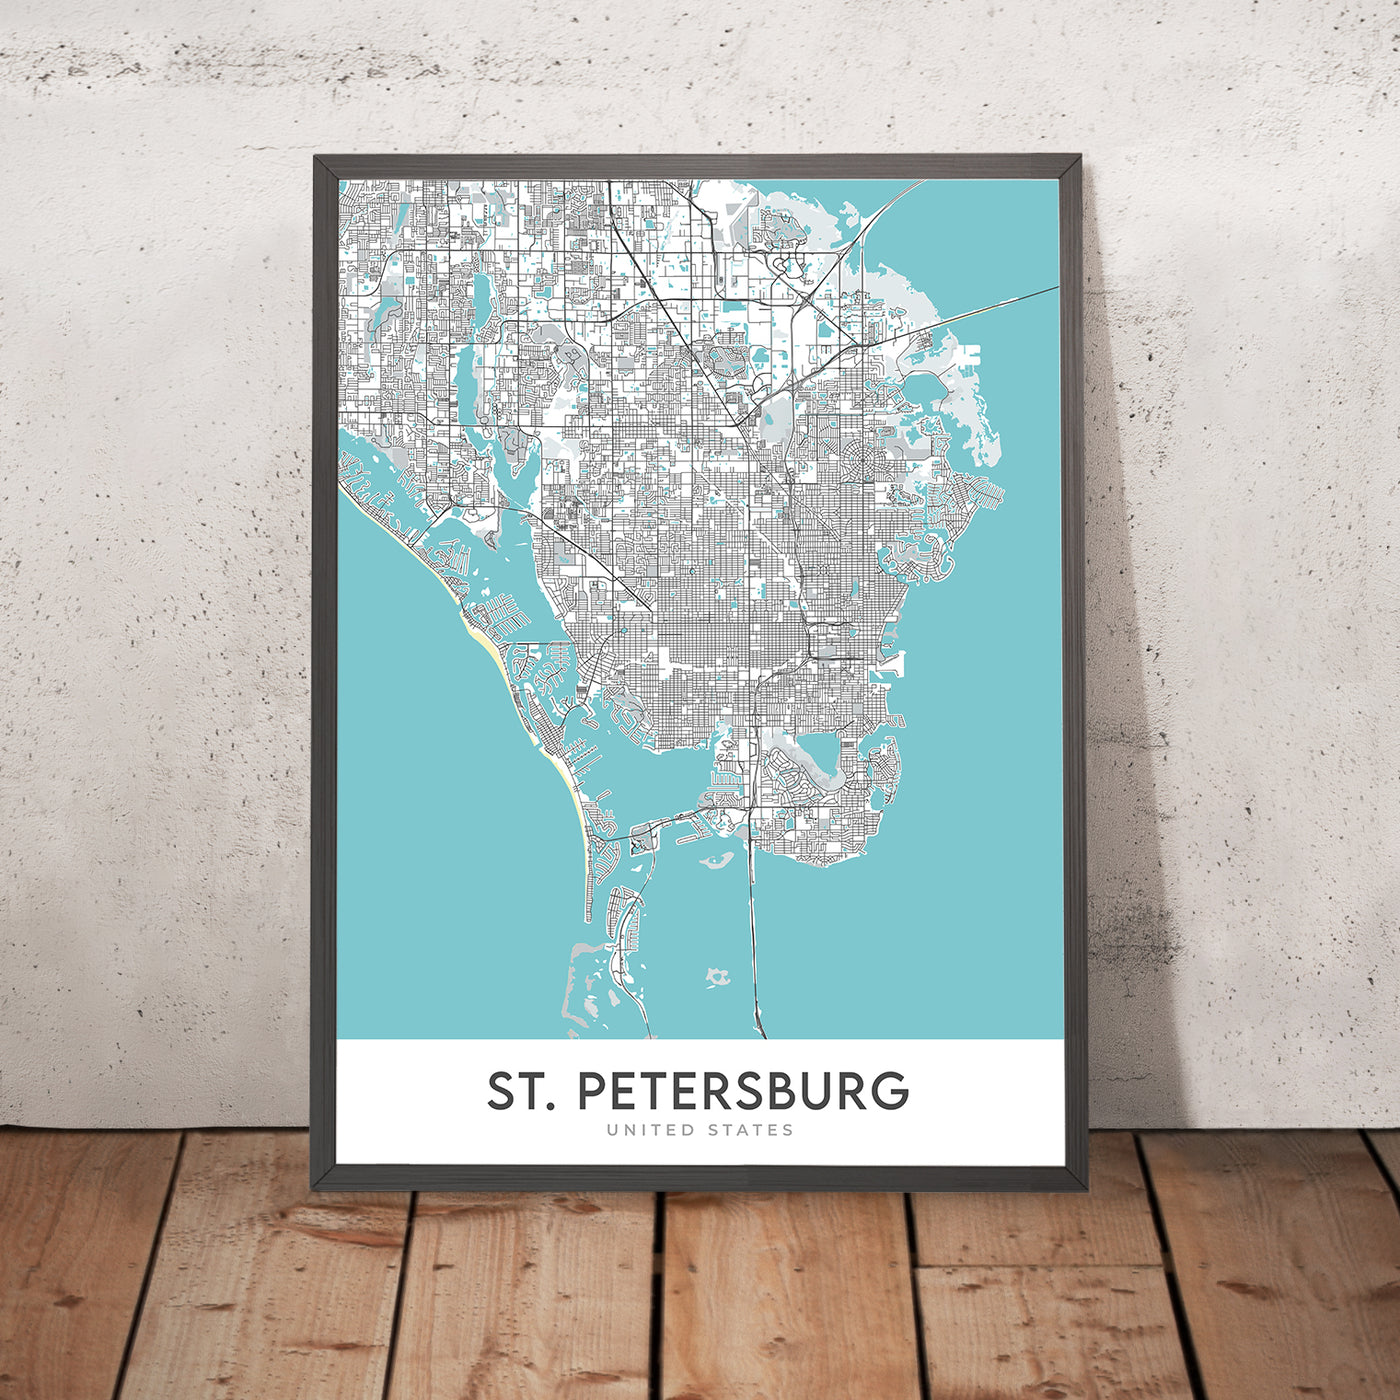 Modern City Map of St. Petersburg, FL: Crescent Lake, Downtown, Old Northeast, Pinellas Point, The Pier